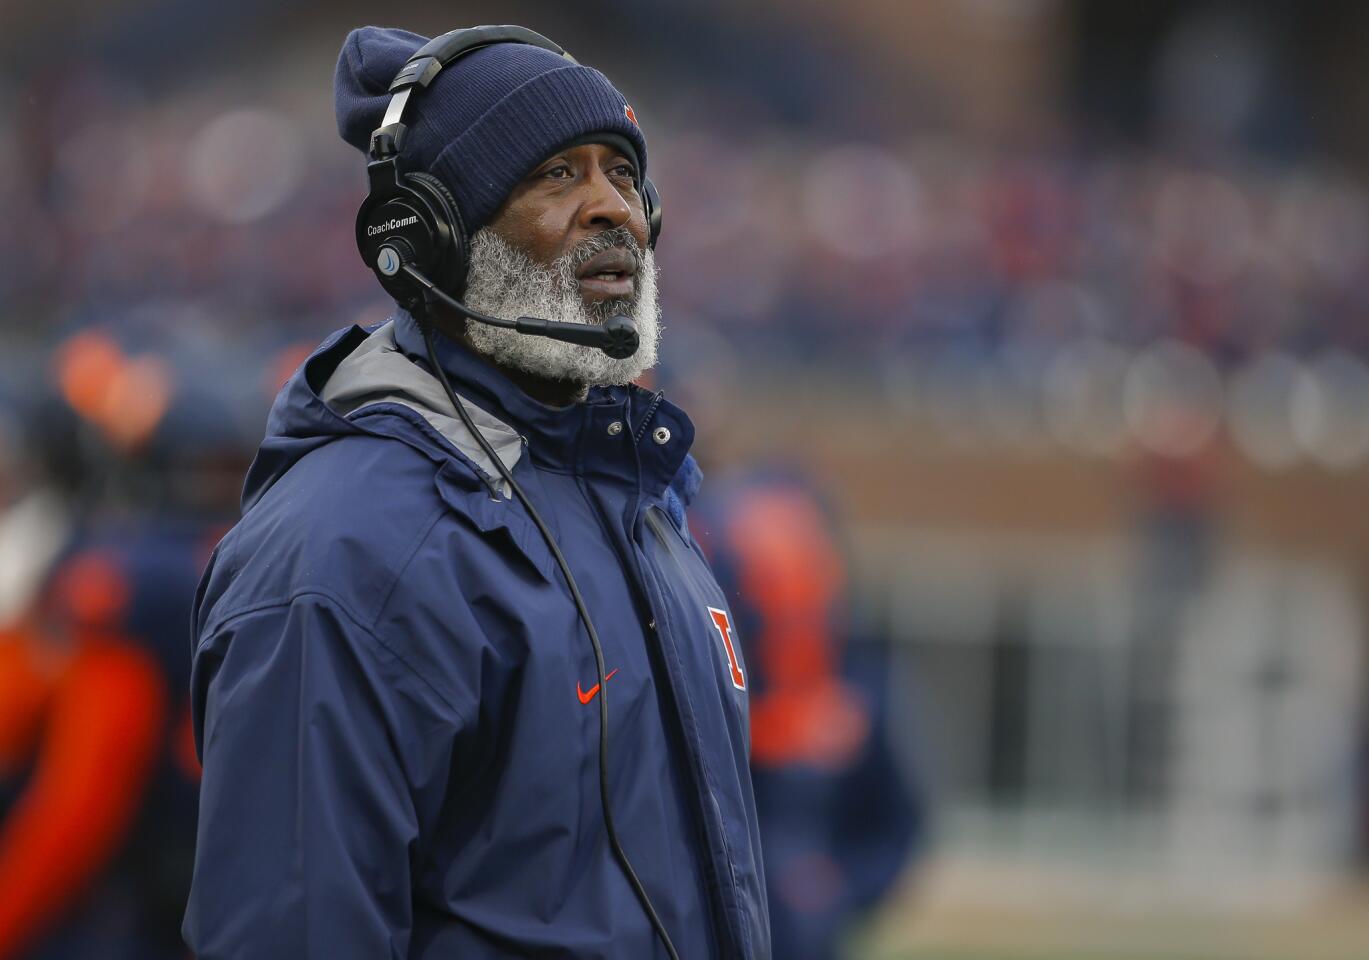 Illinois coach Lovie looks up at the scoreboard during a game against Iowa on Nov. 17, 2018, in Champaign.